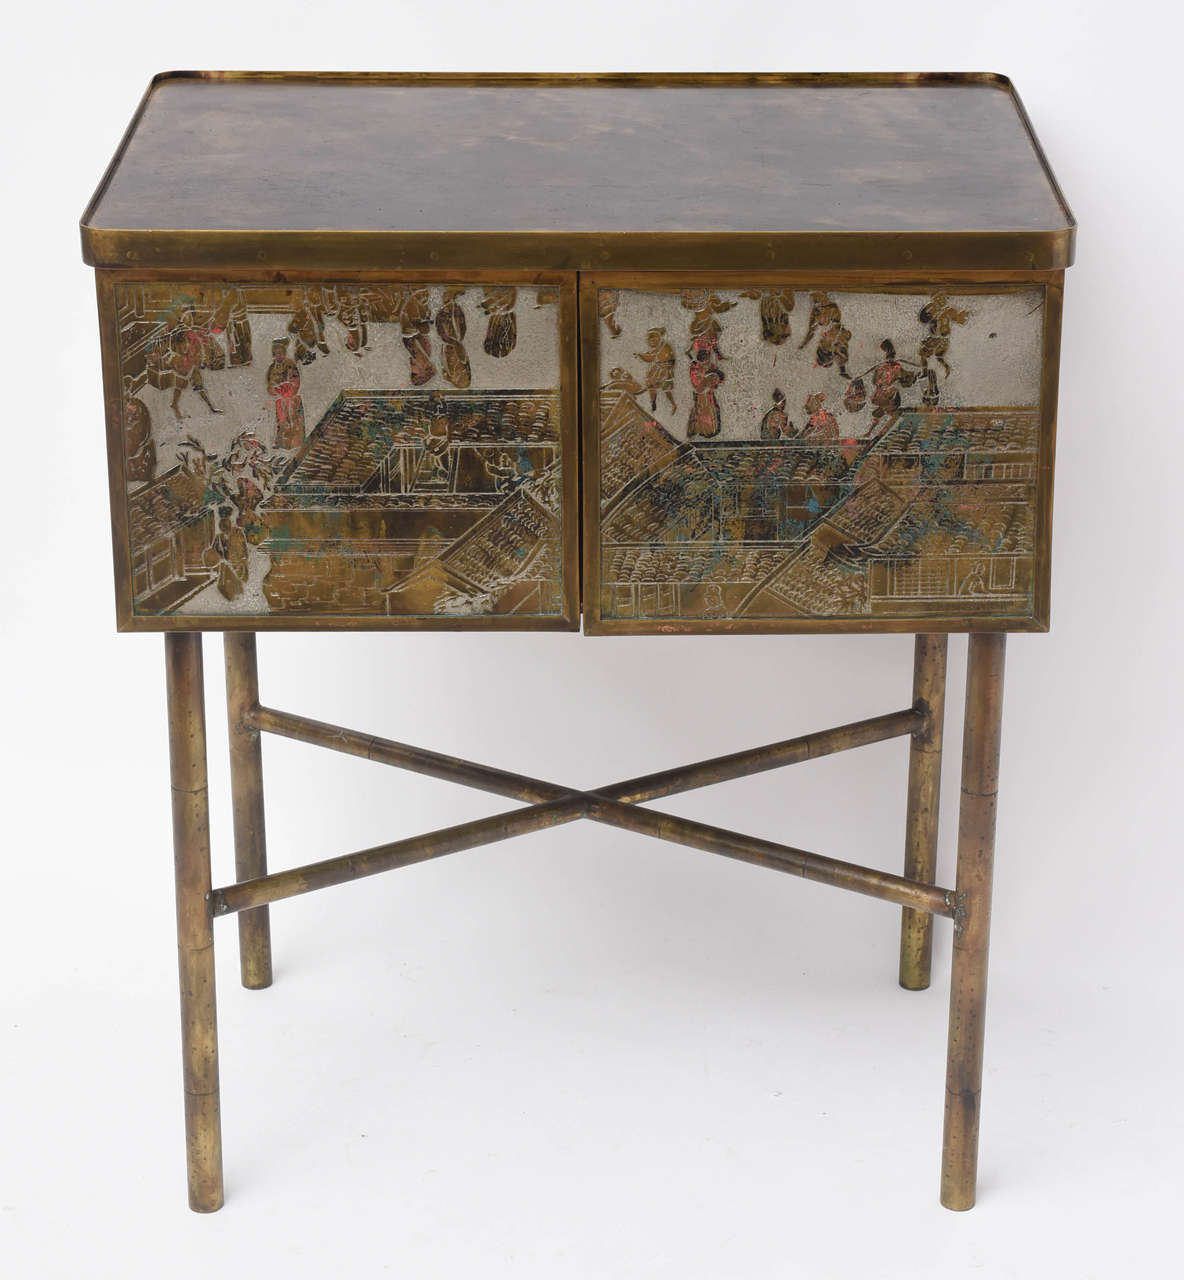 A diminutive chinoiserie cabinet consisting of acid-etched and enameled panels of brass and pewter.
Original painted interior.